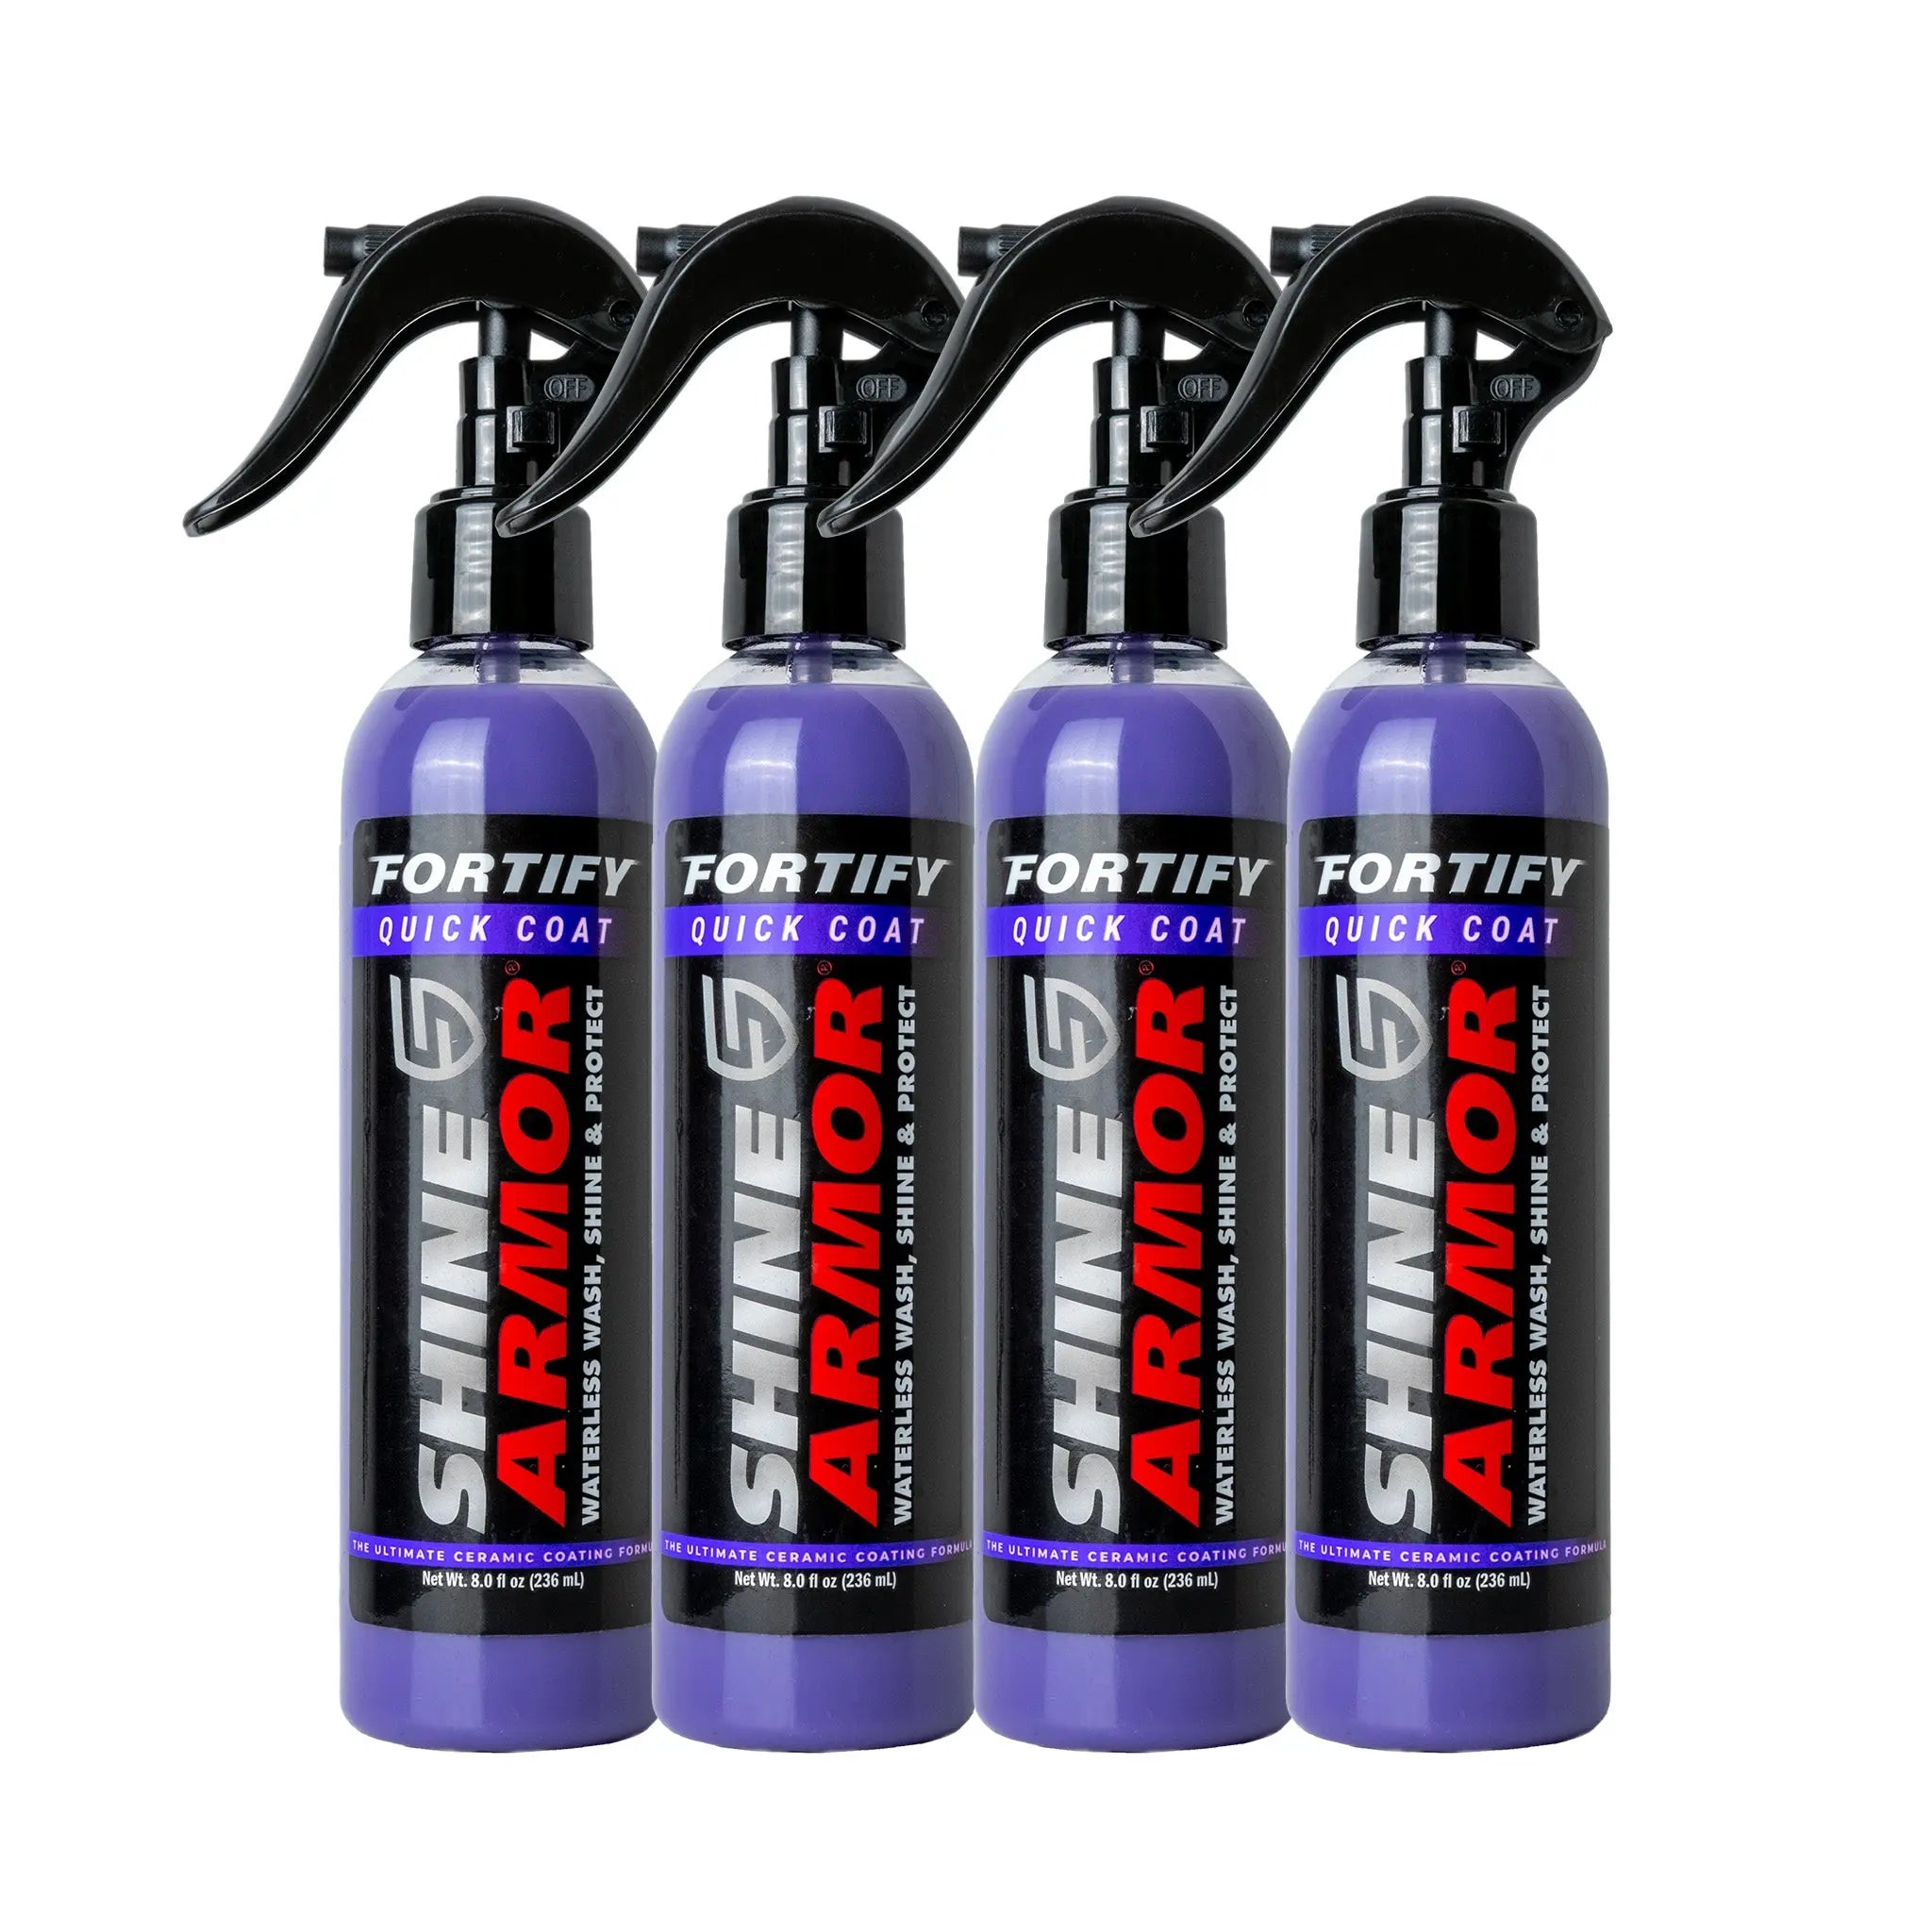 Fortify Quick Coat Shine Armor best price